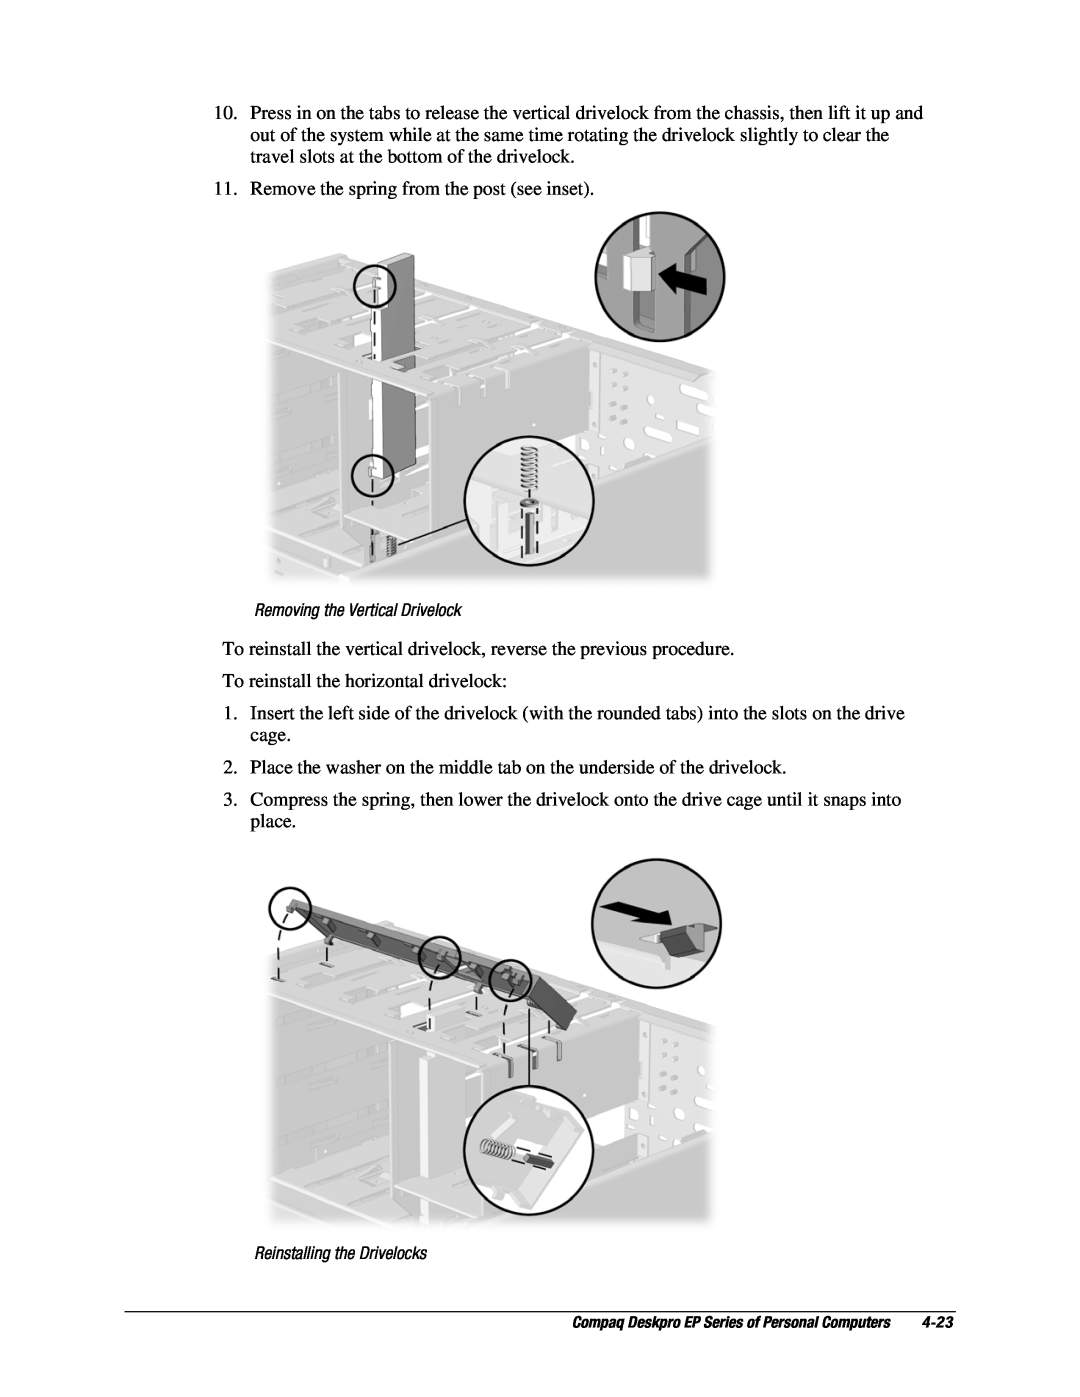 Compaq EP Series manual Remove the spring from the post see inset 